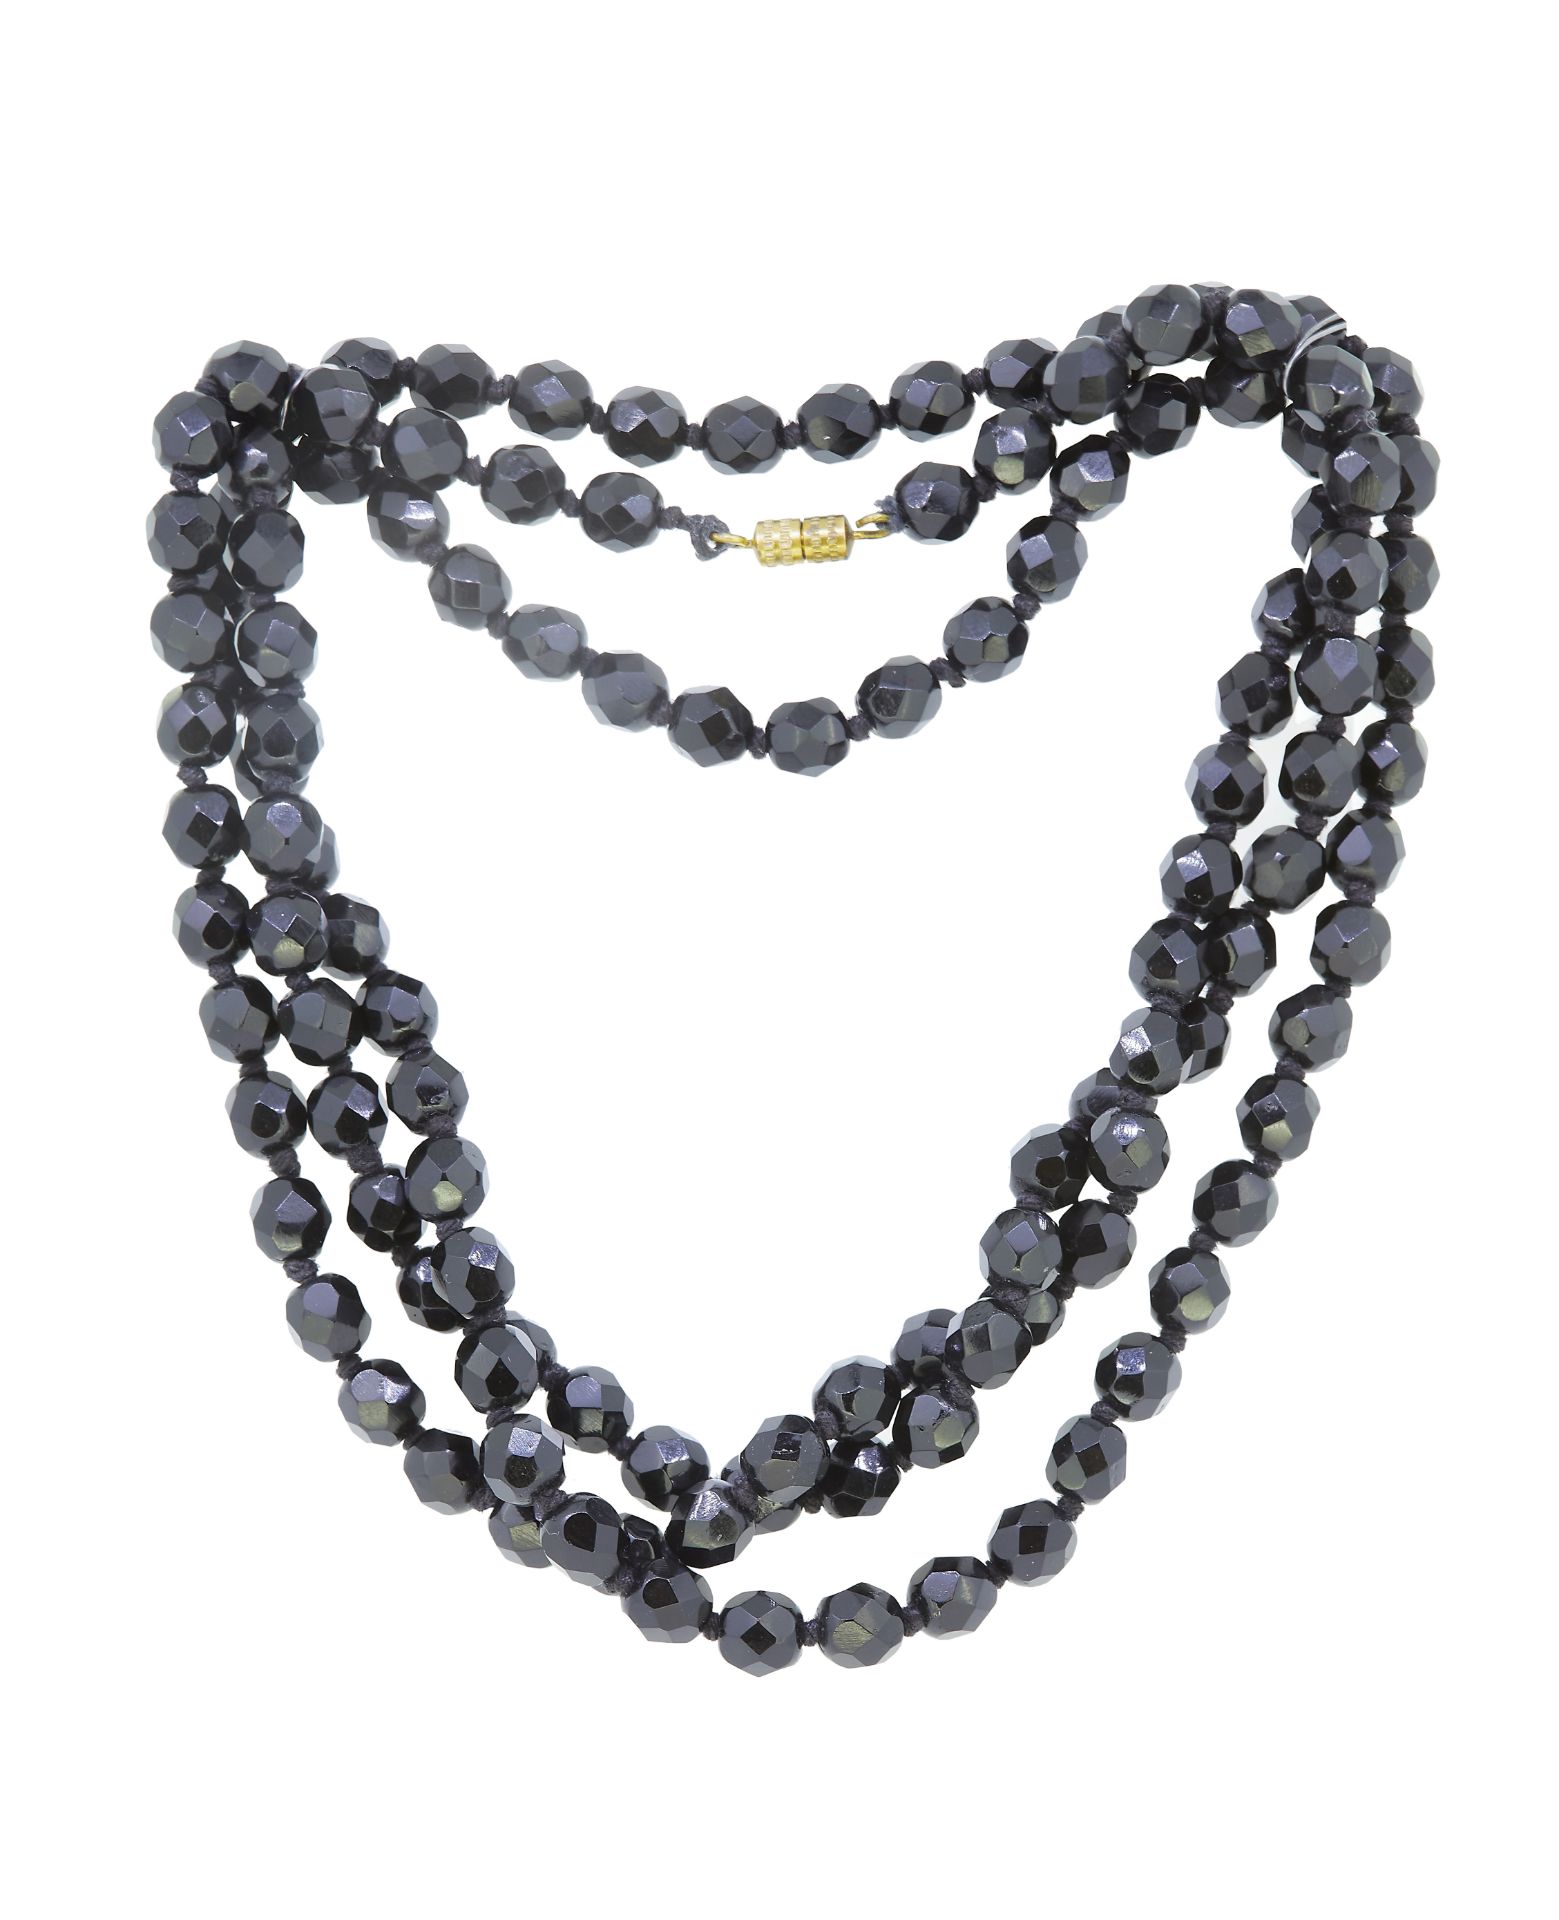 JET BEAD NECKLACE - Image 2 of 2